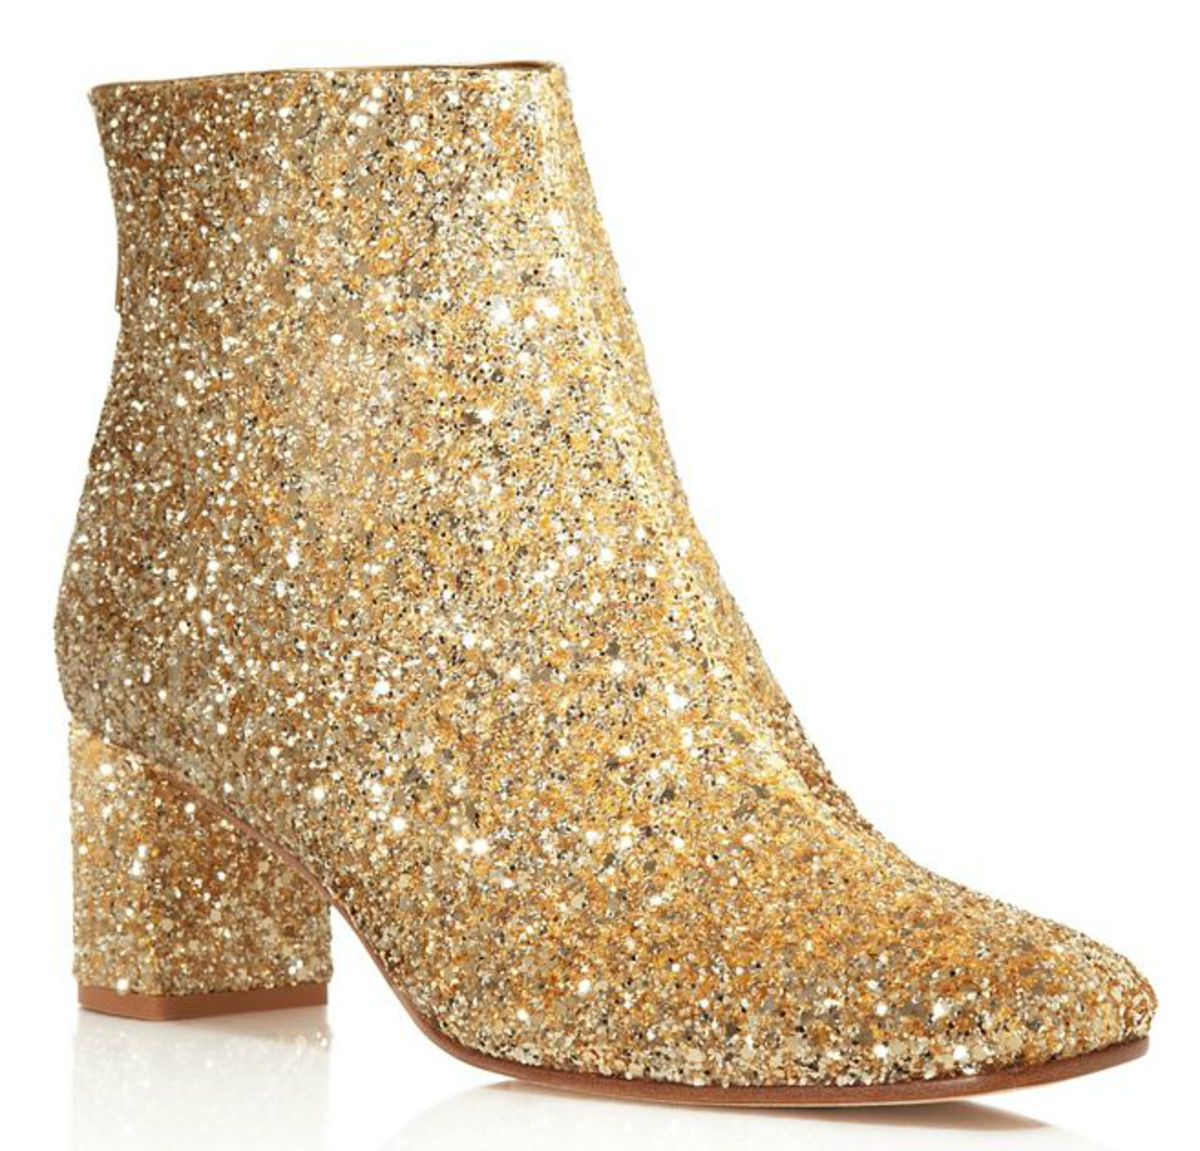 Kate Spade New York glitter mid-heel booties, $398, available at Bloomingdale's.